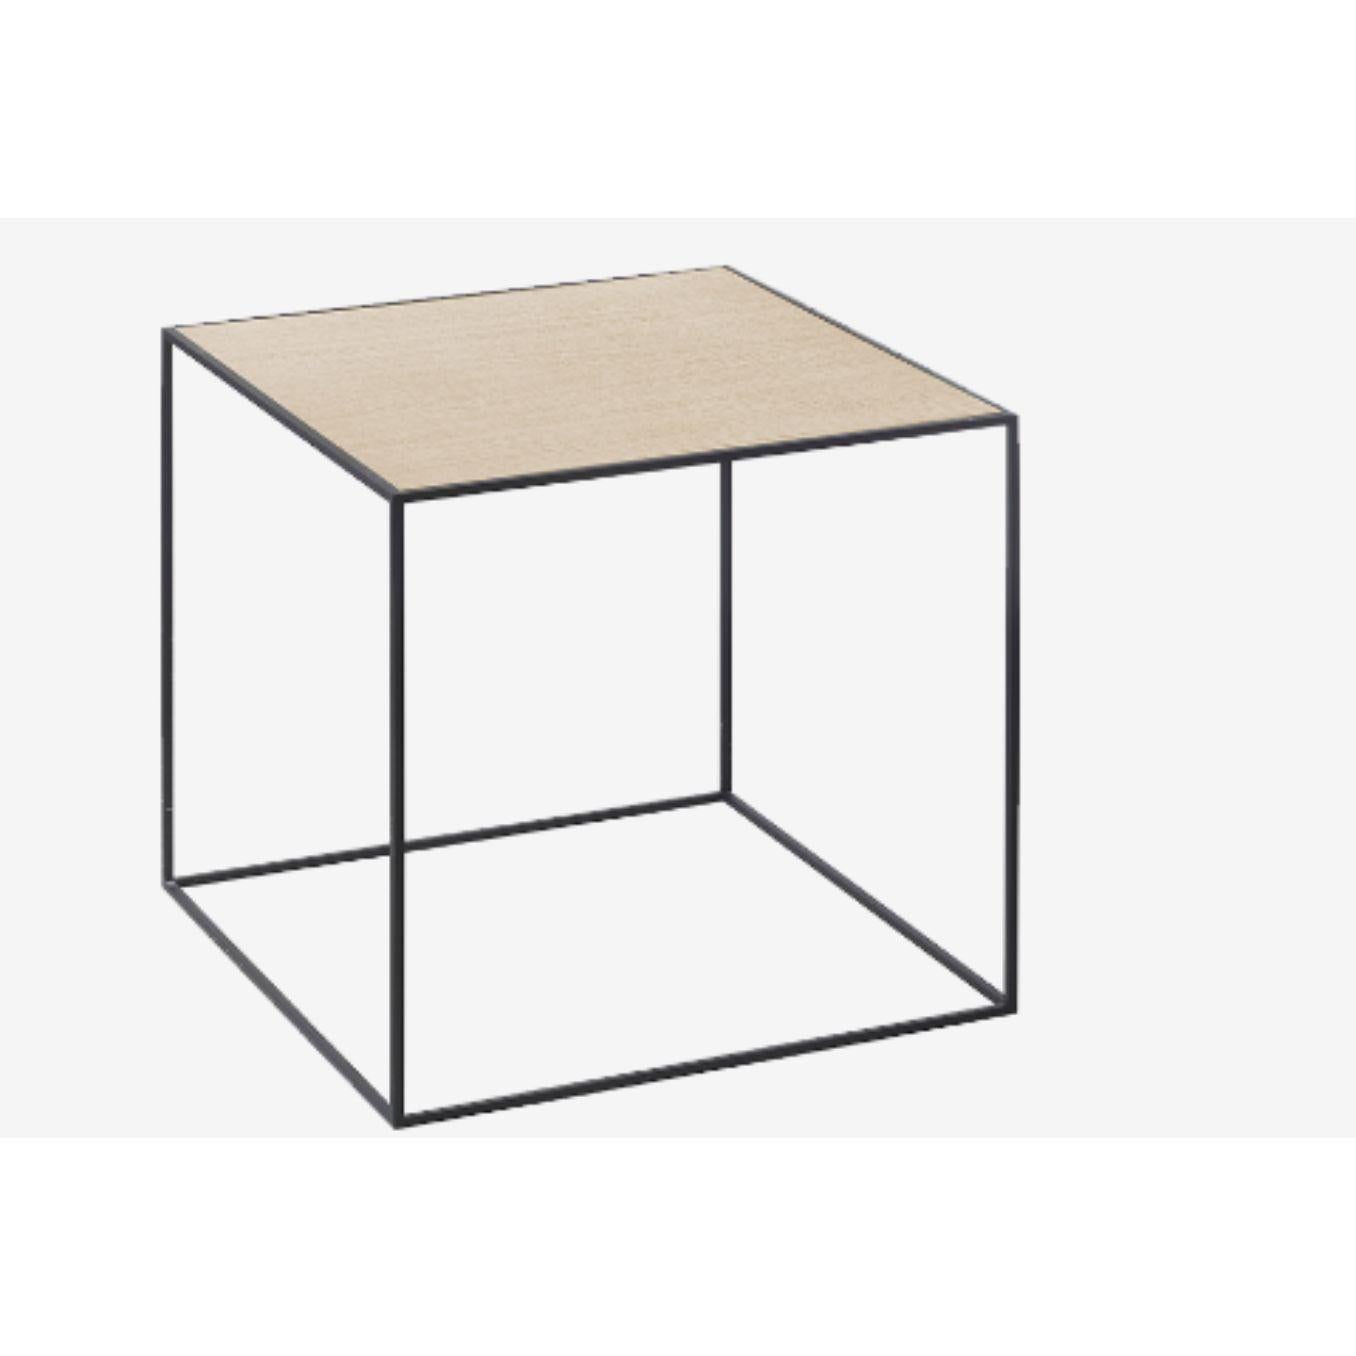 49 Oak brass twin table by Lassen.
Dimensions: w 49 x d 49 x h 0.5 cm. 
Materials: Finér, Melamin, Melamin, Melamine, metal, veneer, oak, brass.
Also available in different colors and dimensions. 

With an uncomplicated simplicity and a fond